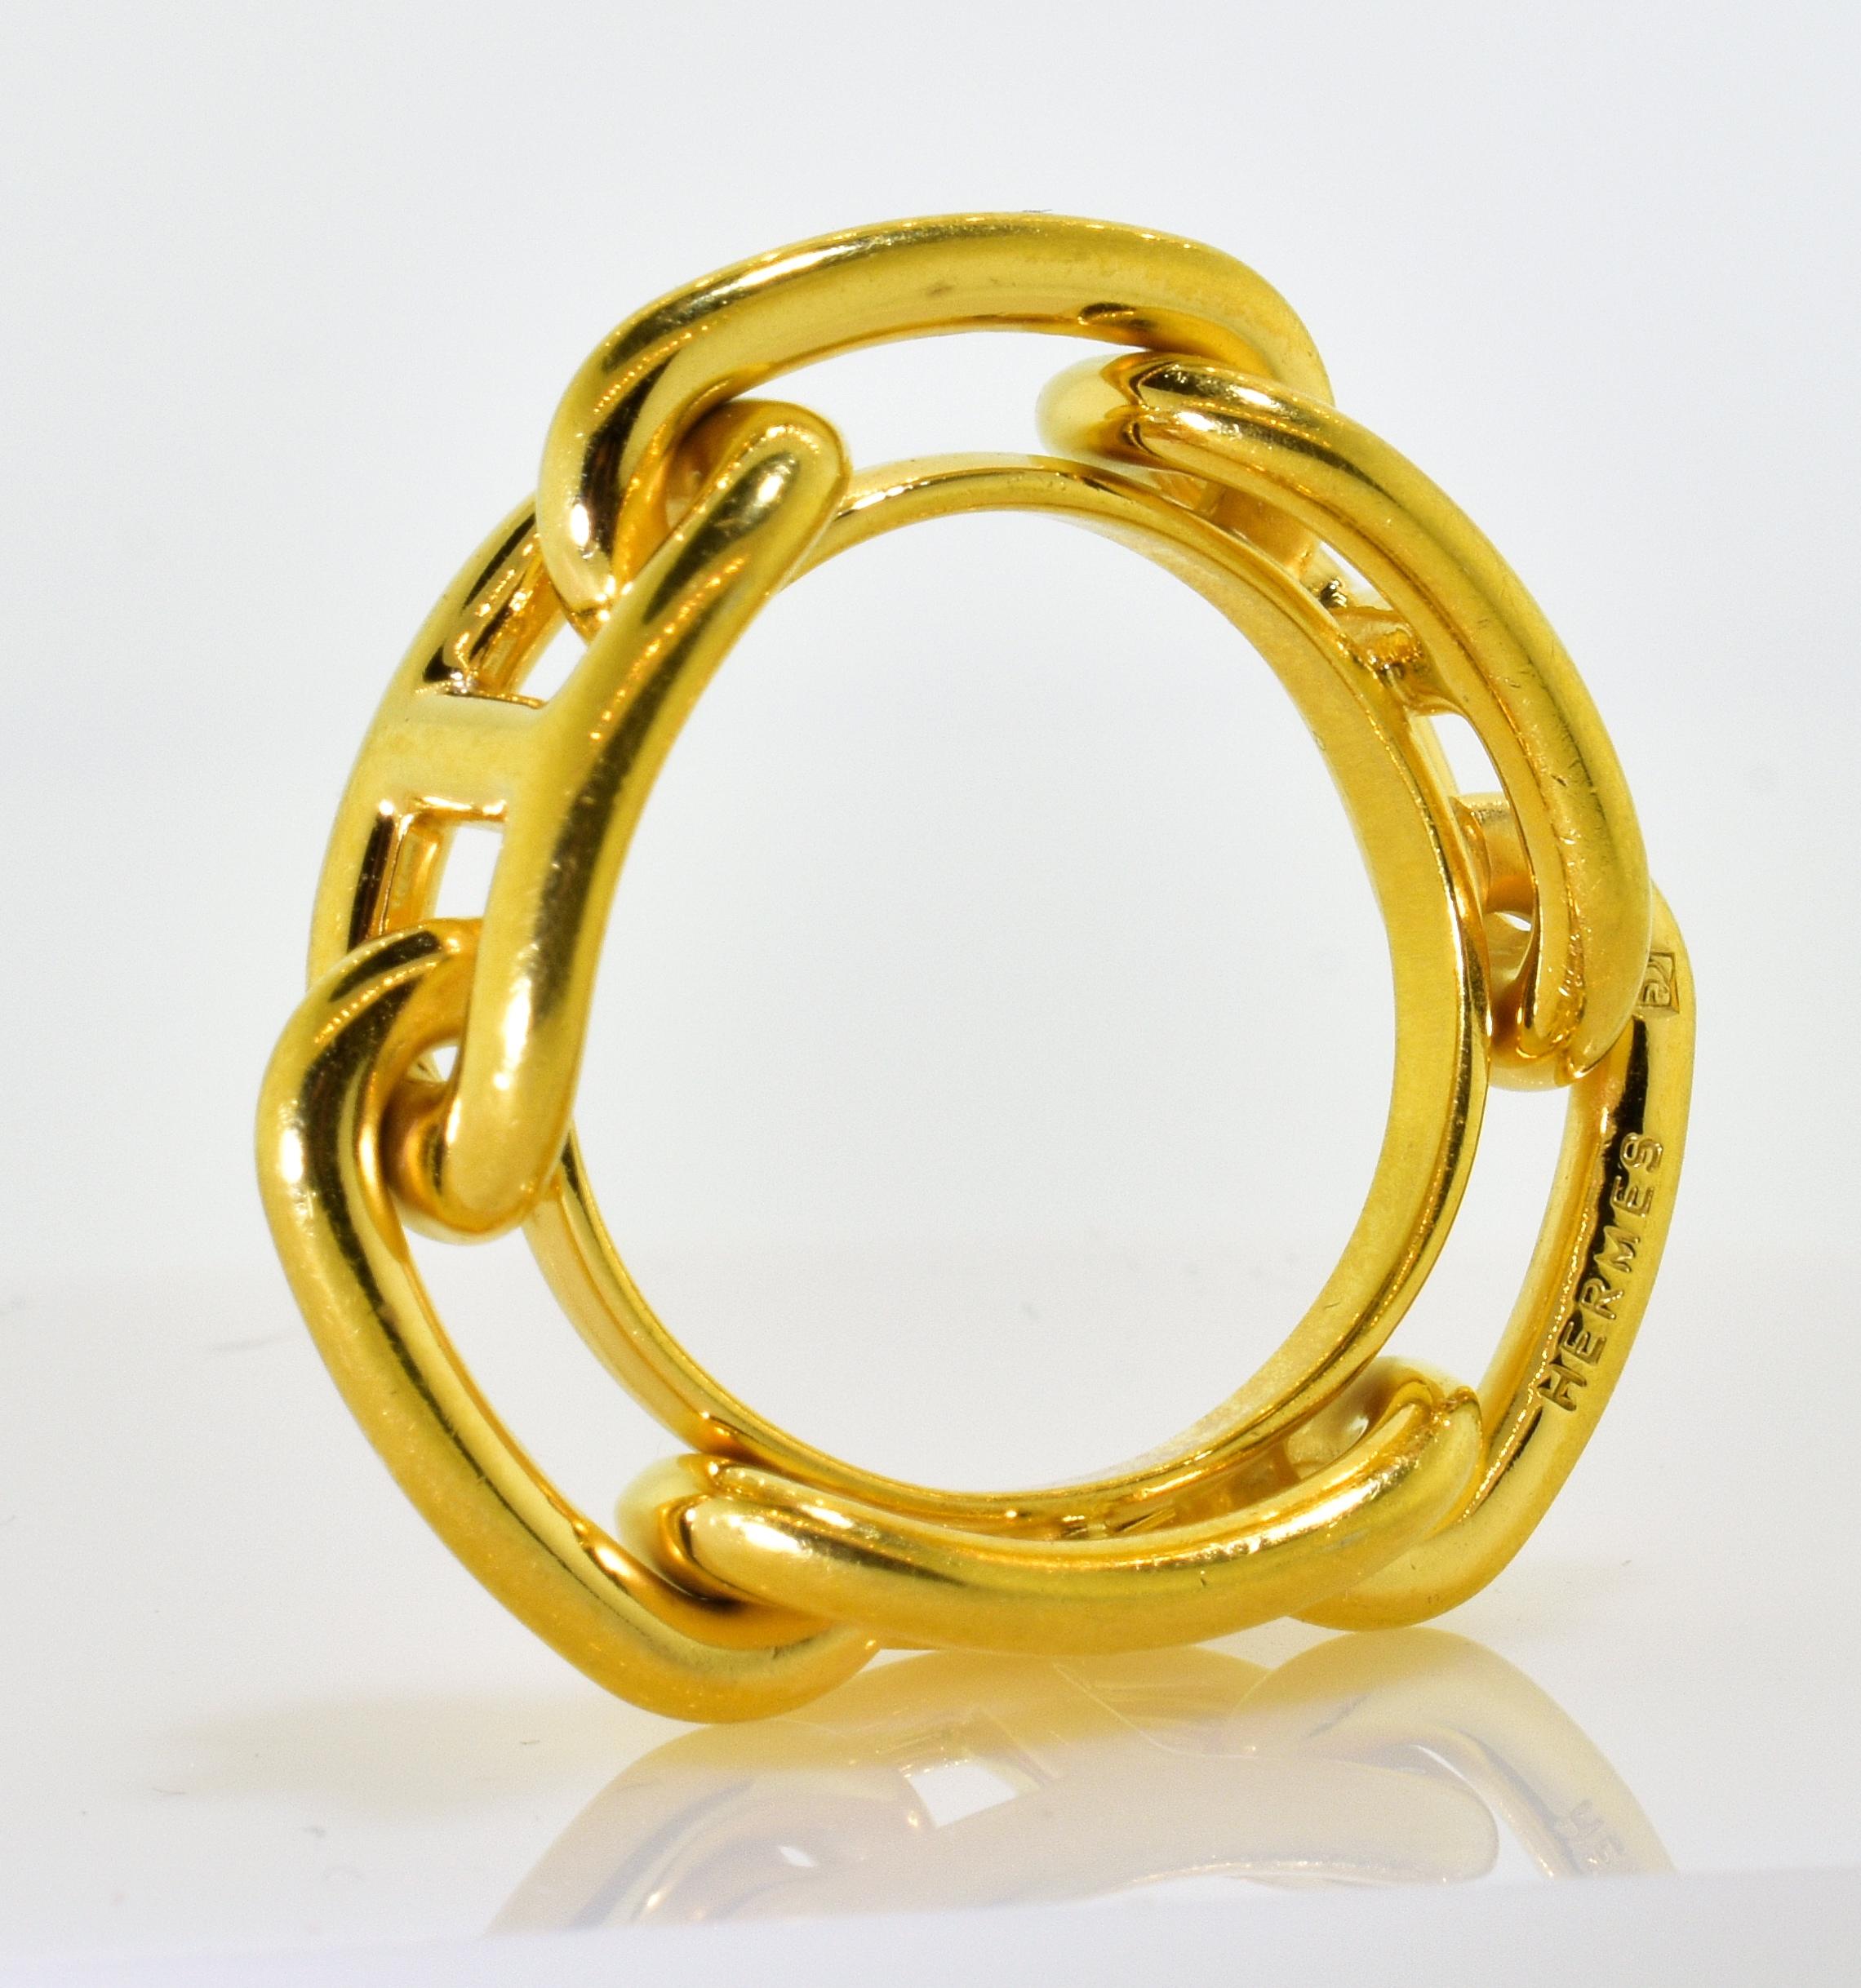 Hermes Paris high yellow gold color ring or scarf ring.  Known for their classic equestrian motifs for all their items, this ring is one that is not seen often.  It can be worn as a finger ring (Size 8), or as a scarf ring.  In high yellow gold